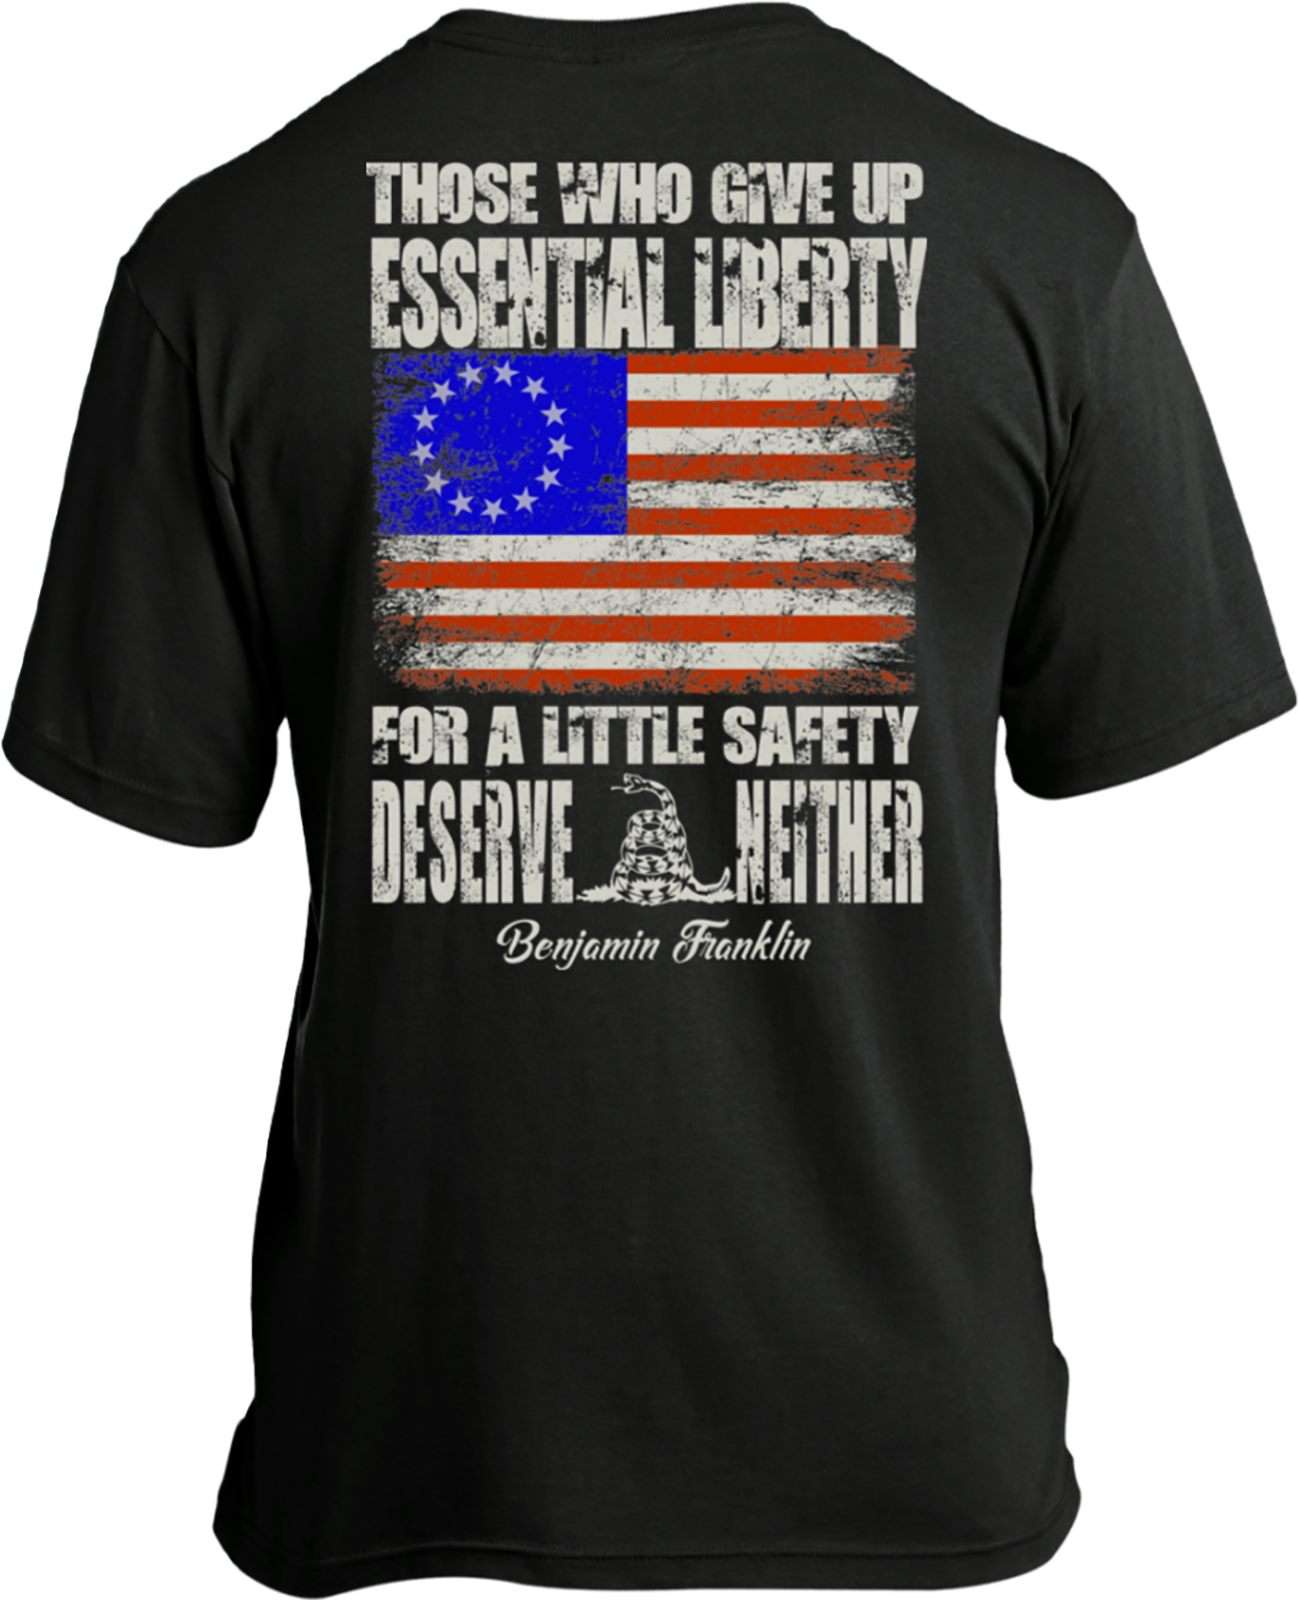 Those who give up essential liberty for a little safety deserve neither - Benjamin Franklin, America president